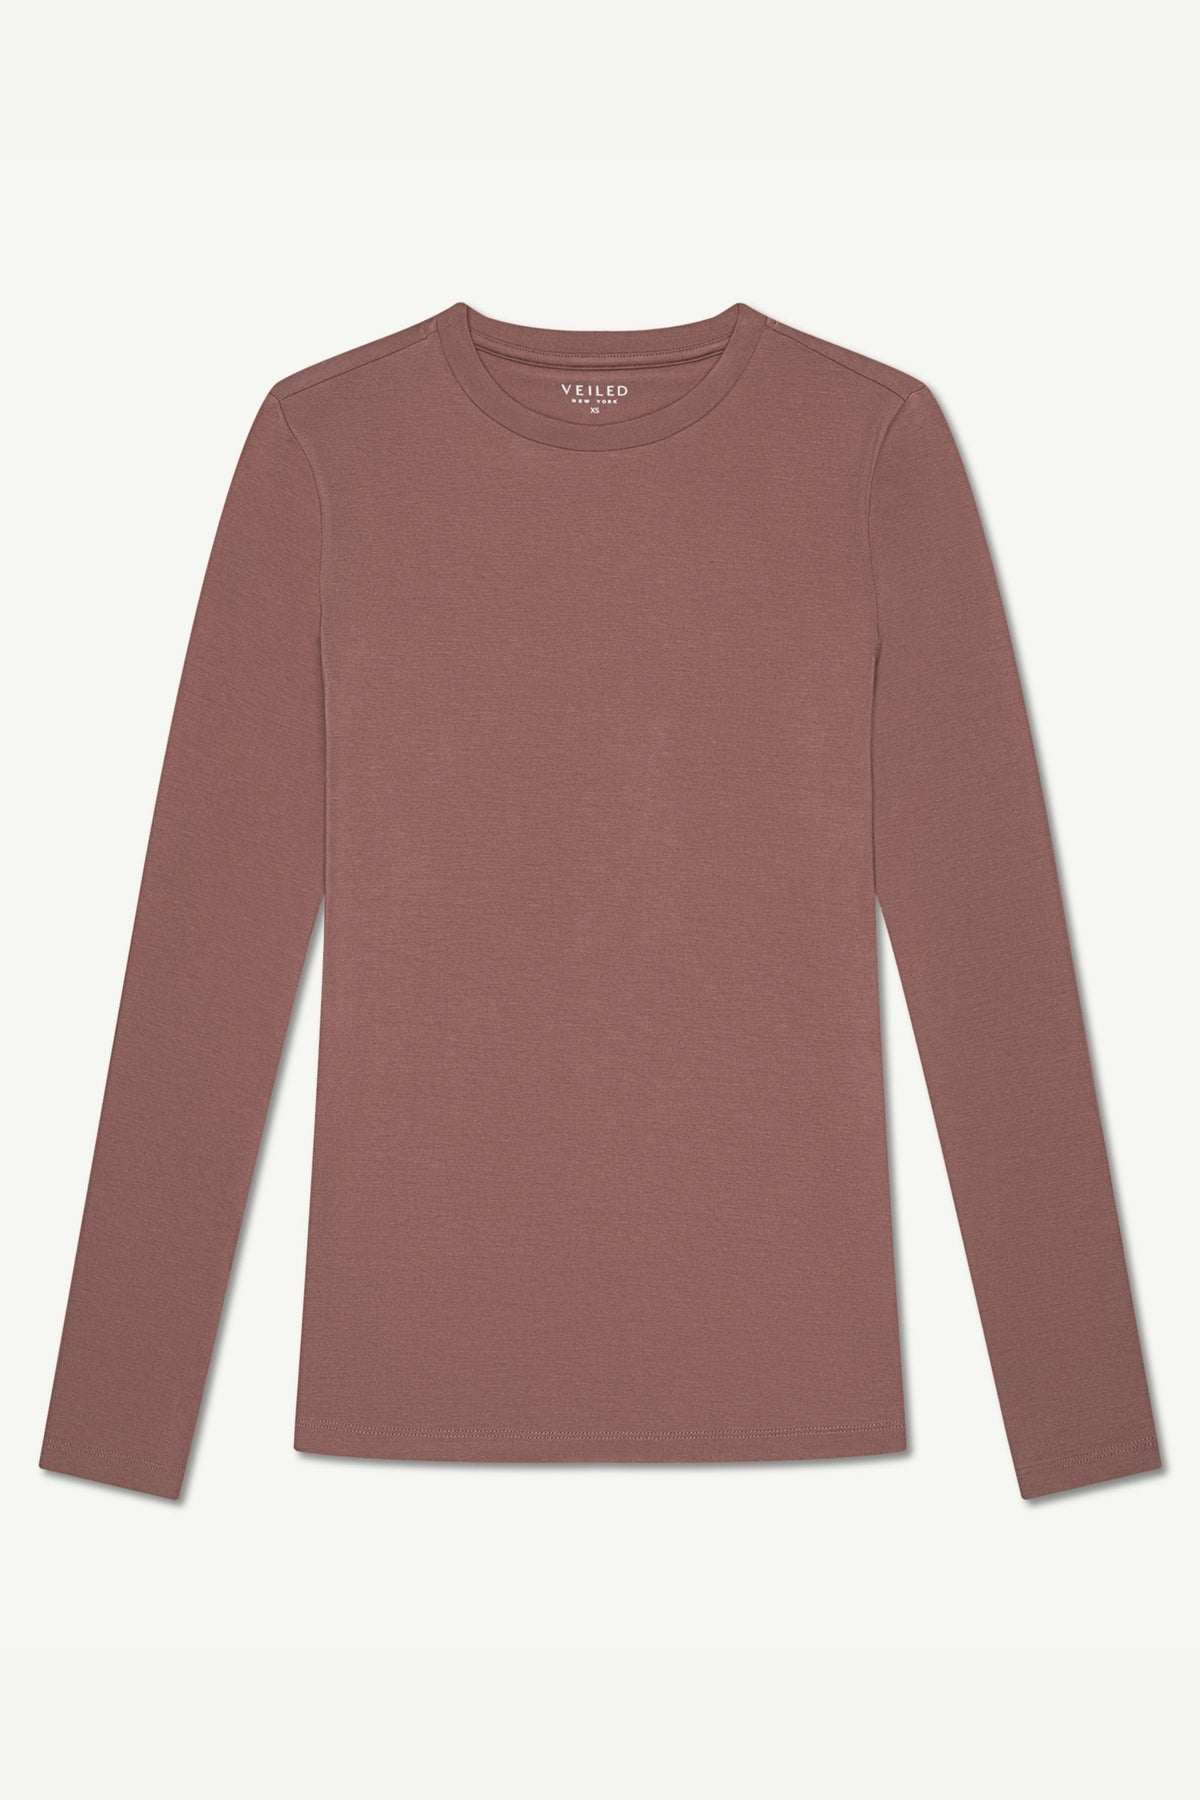 Essential Crew Neck Bamboo Jersey Top - Deep Taupe Clothing epschoolboard 